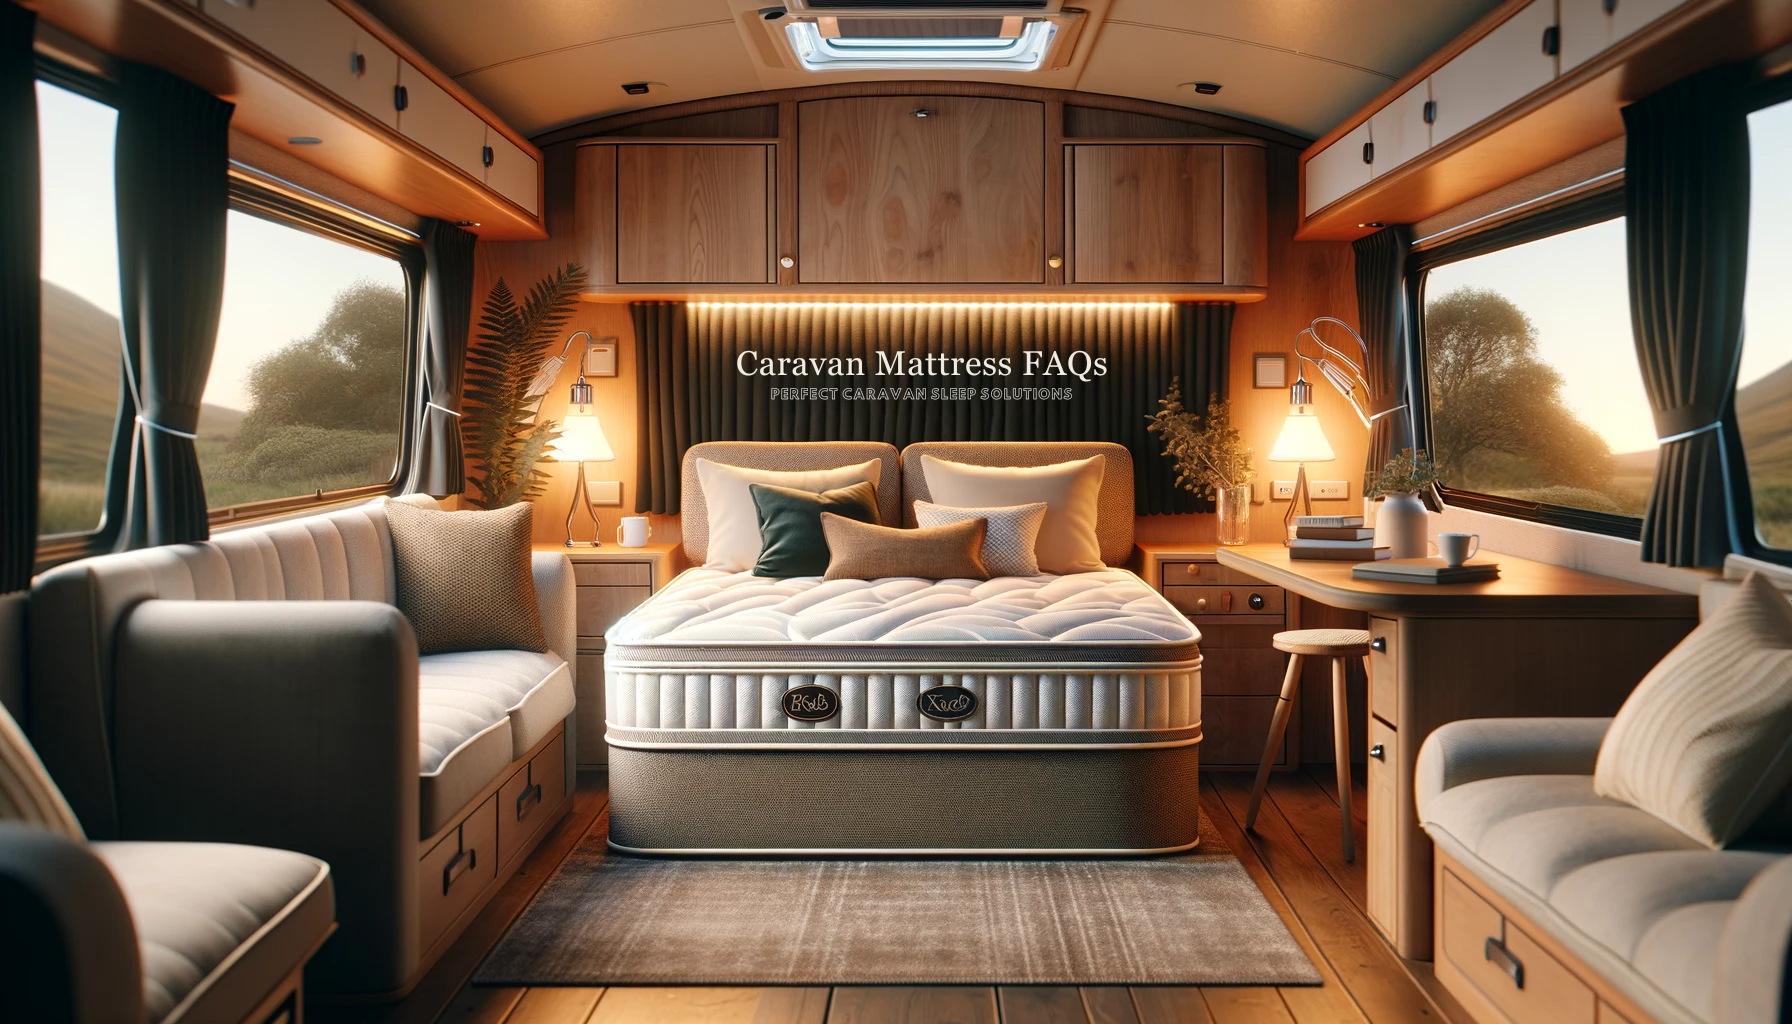 Cozy caravan interior with a bespoke mattress, soft lighting, and comfortable bedding, highlighting a serene sleeping environment for the 'Caravan Mattress FAQs' page banner